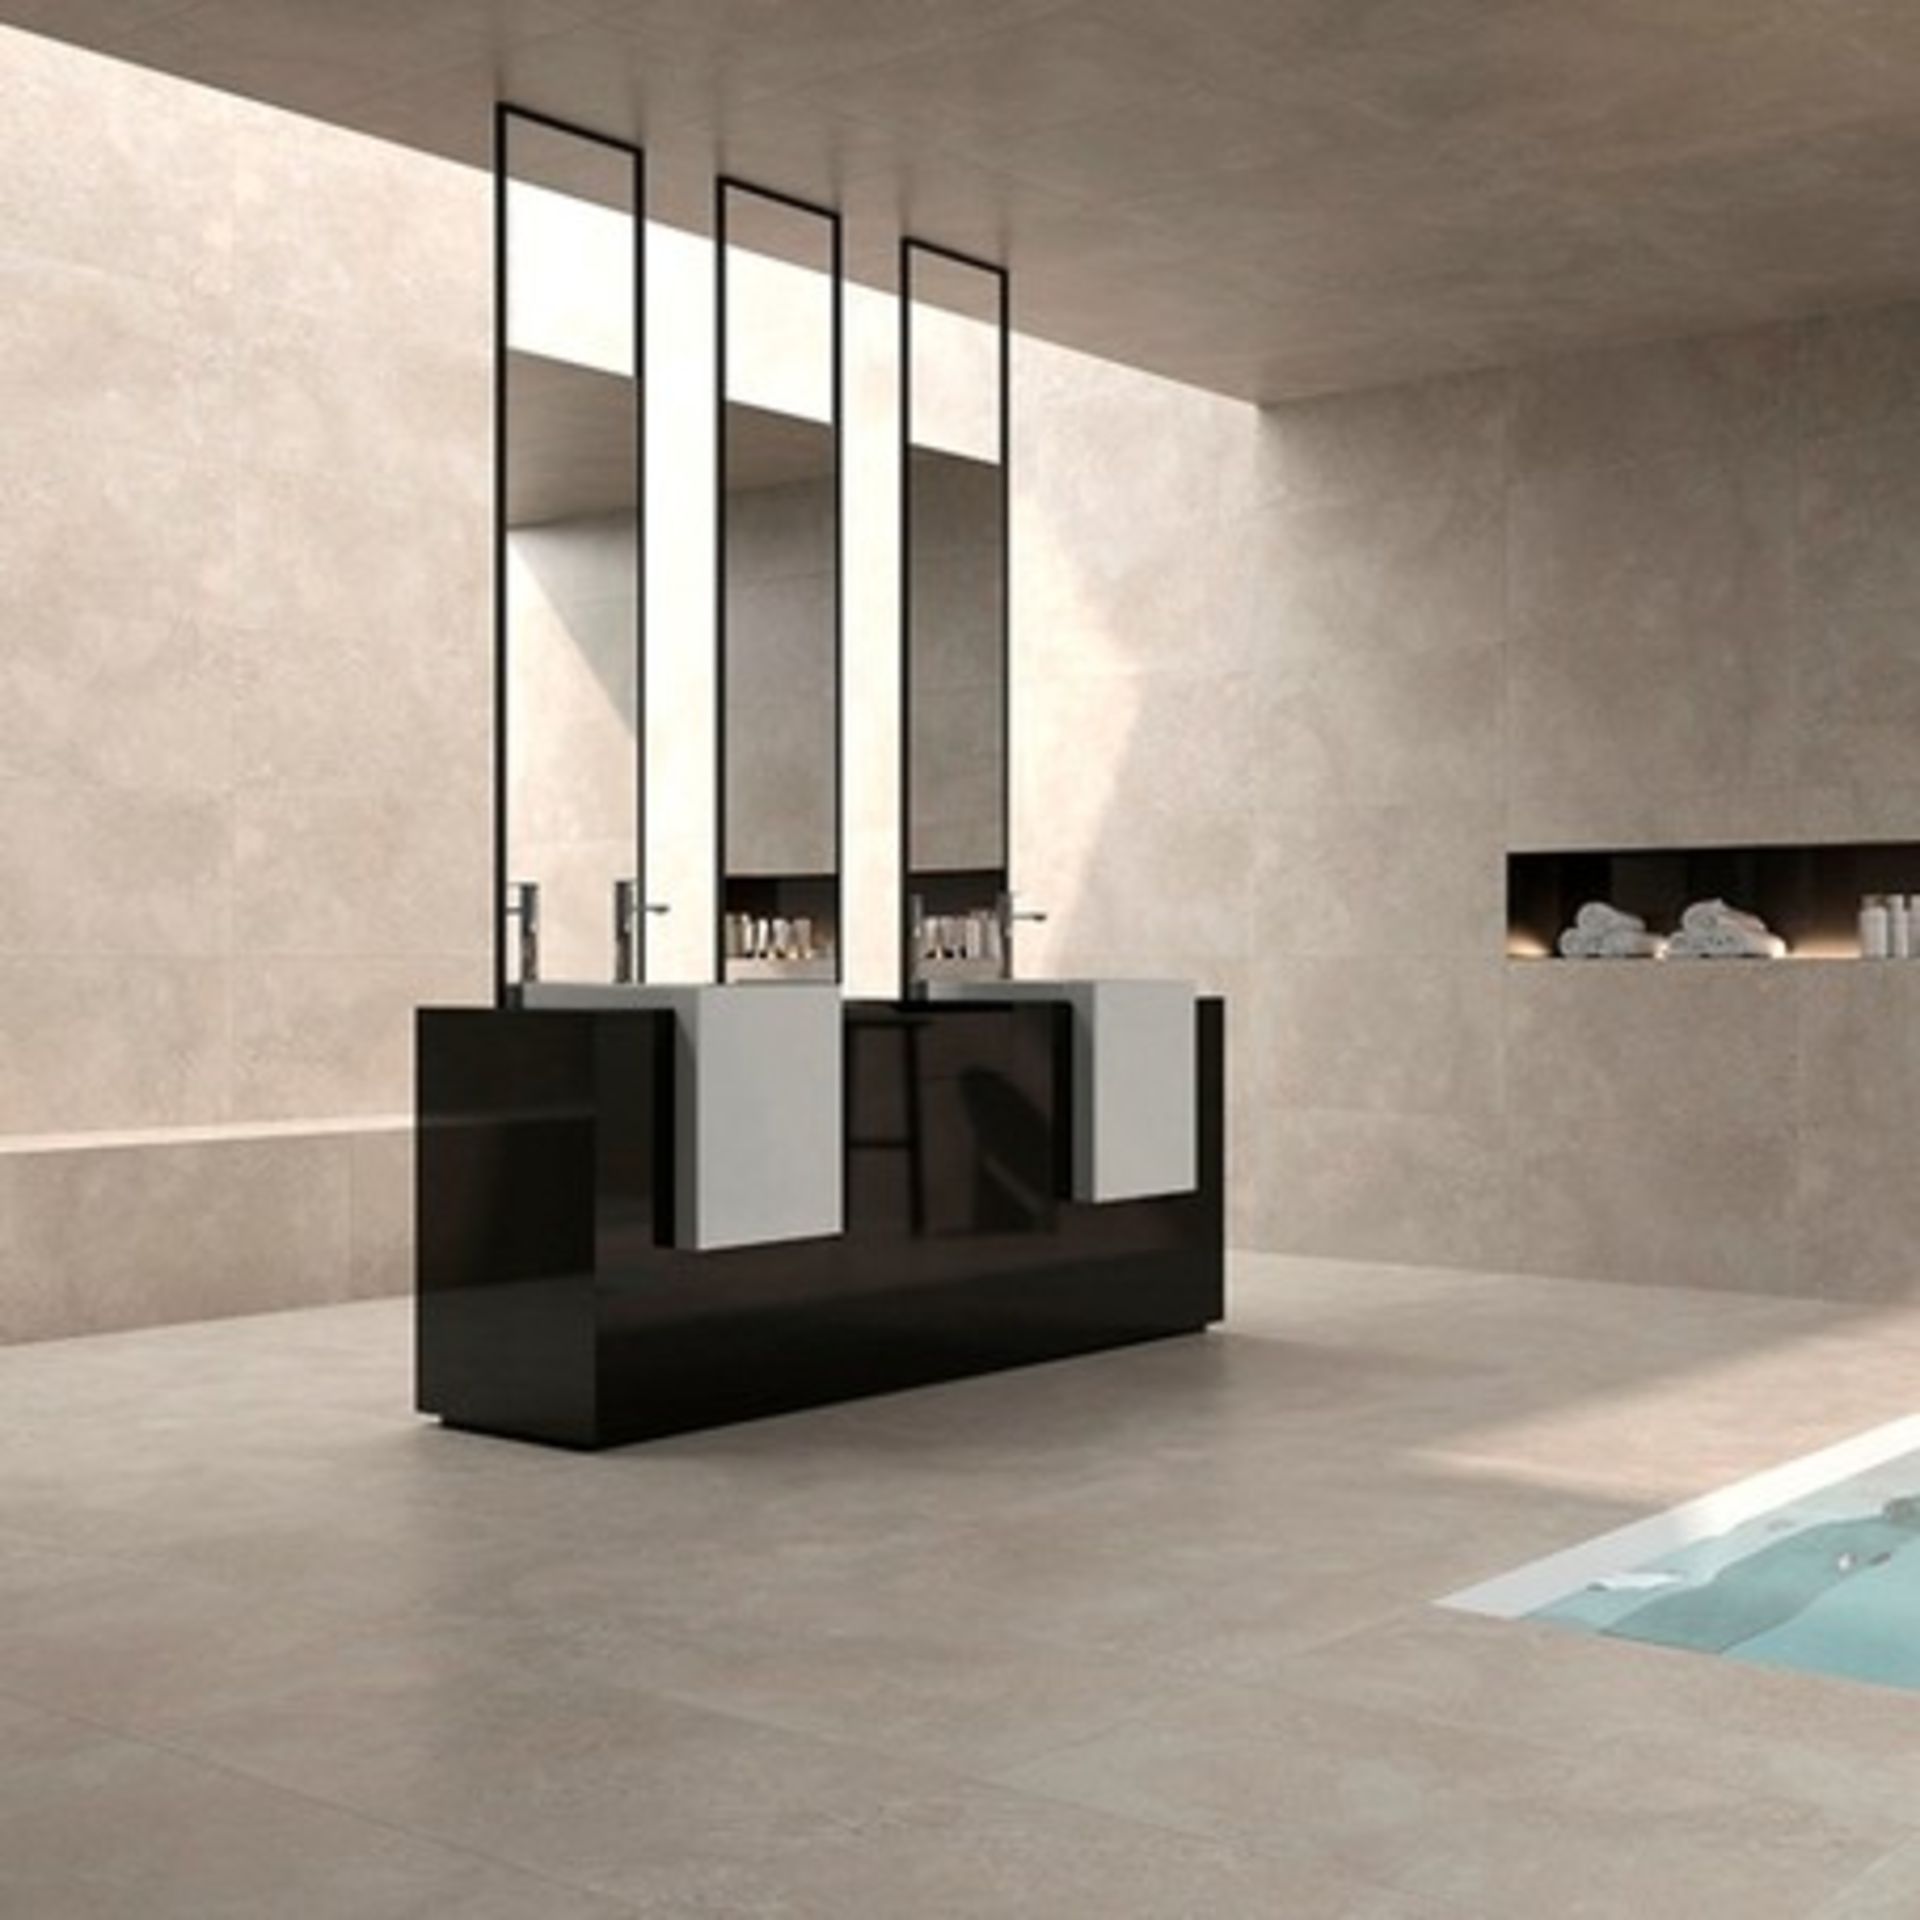 NEW 9m2 Michigan Noce Matte Wall and Floor Tiles. 440x440mm per tile, 8mm thick. These trend ...